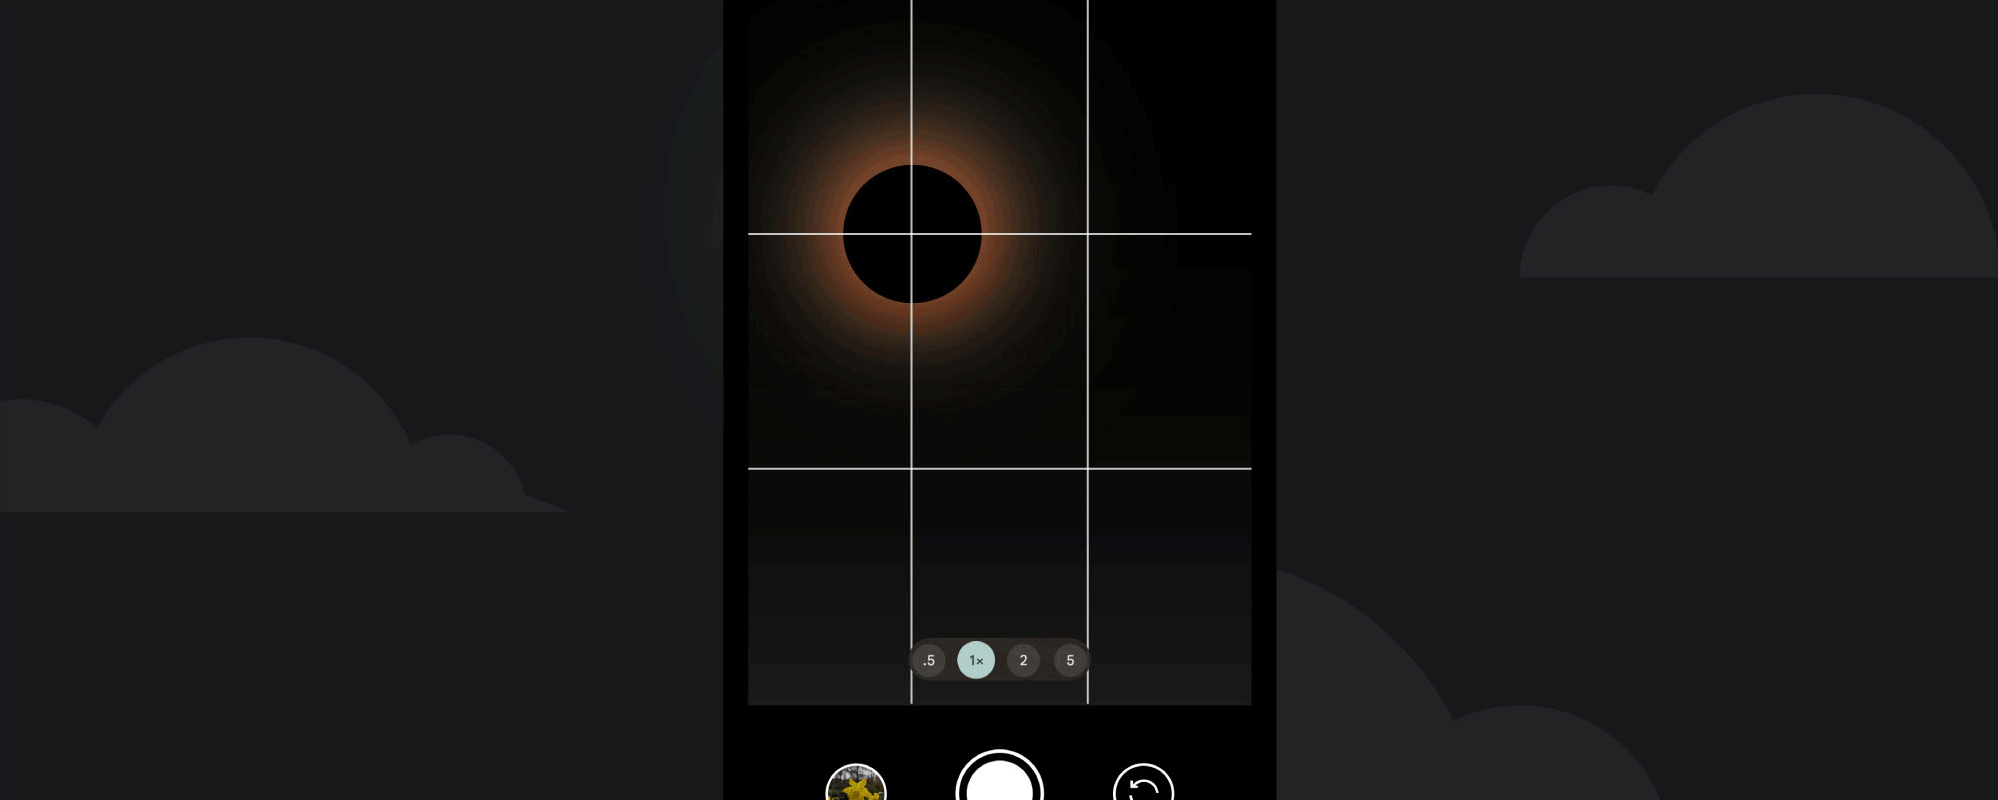 An illustrated GIF of the Pixel camera grid function in action.